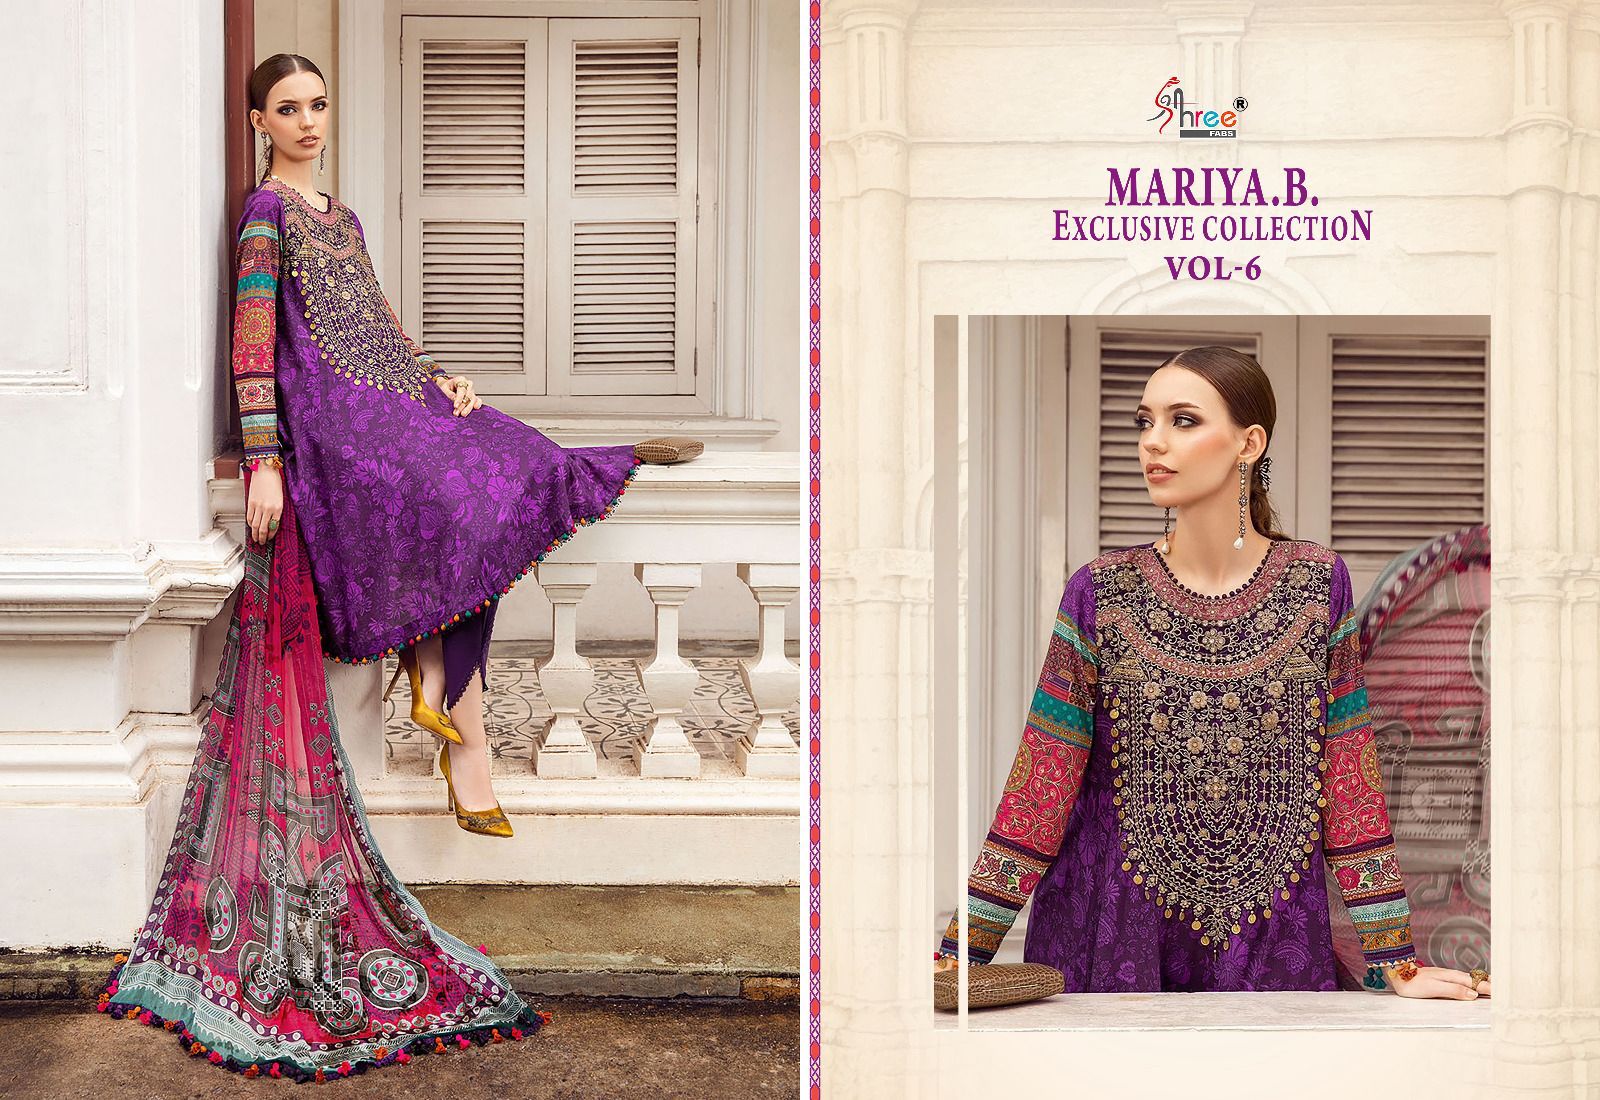 Shree fabs mariya.b. exclusive collection vol 6 cotton with embroidery work Cotton Dupatta pakistani suits for women - jilaniwholesalesuit